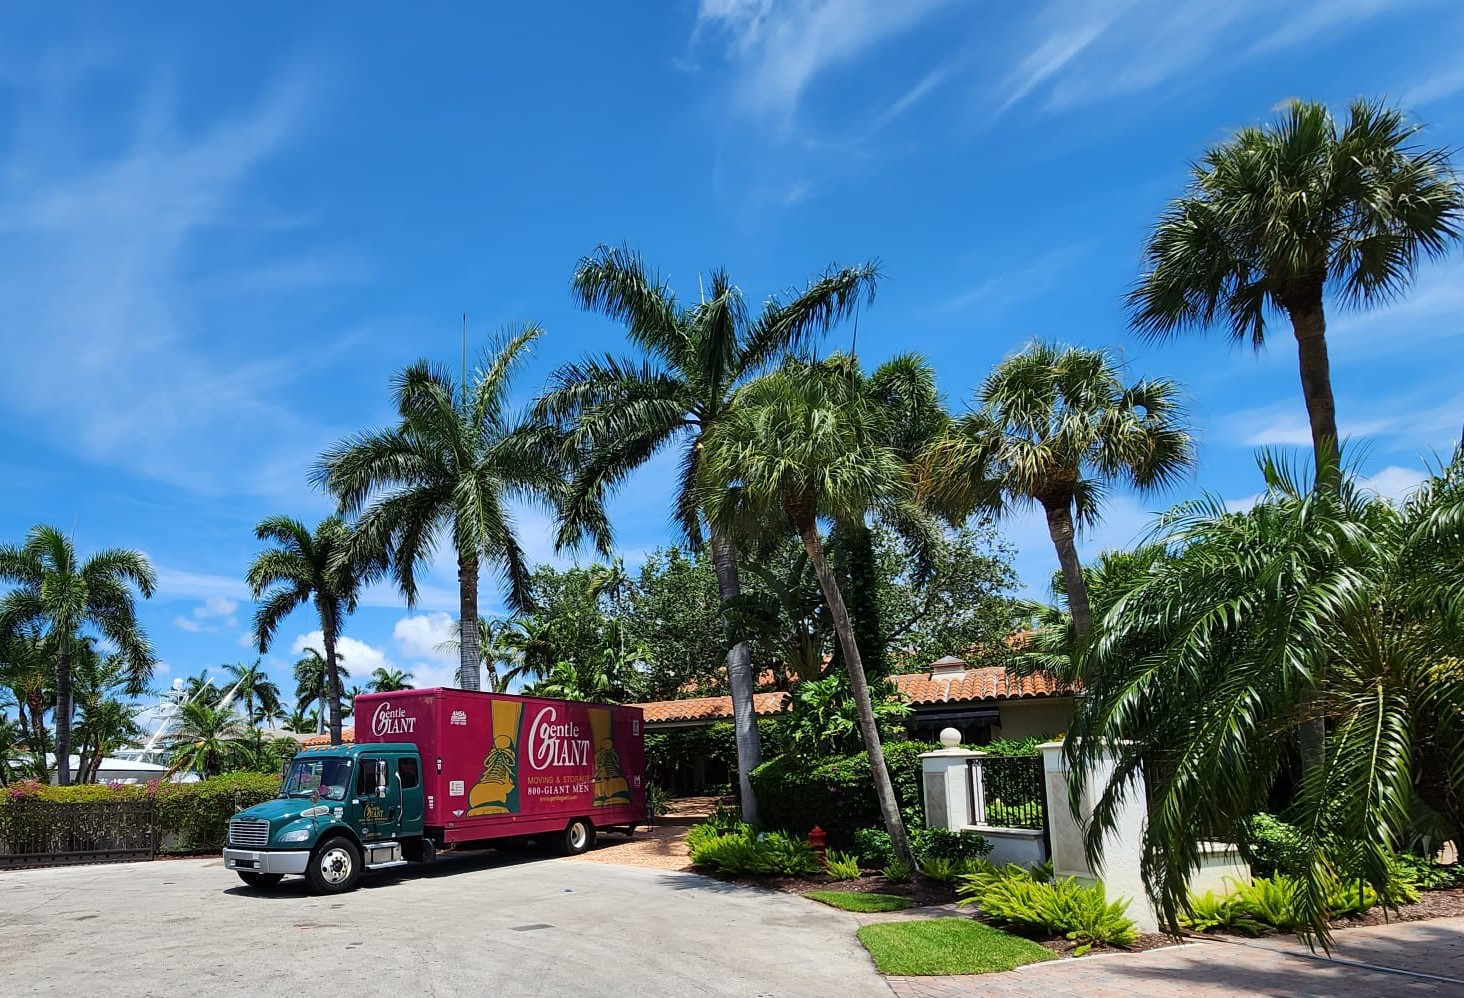 How to find Local Movers in Broward County